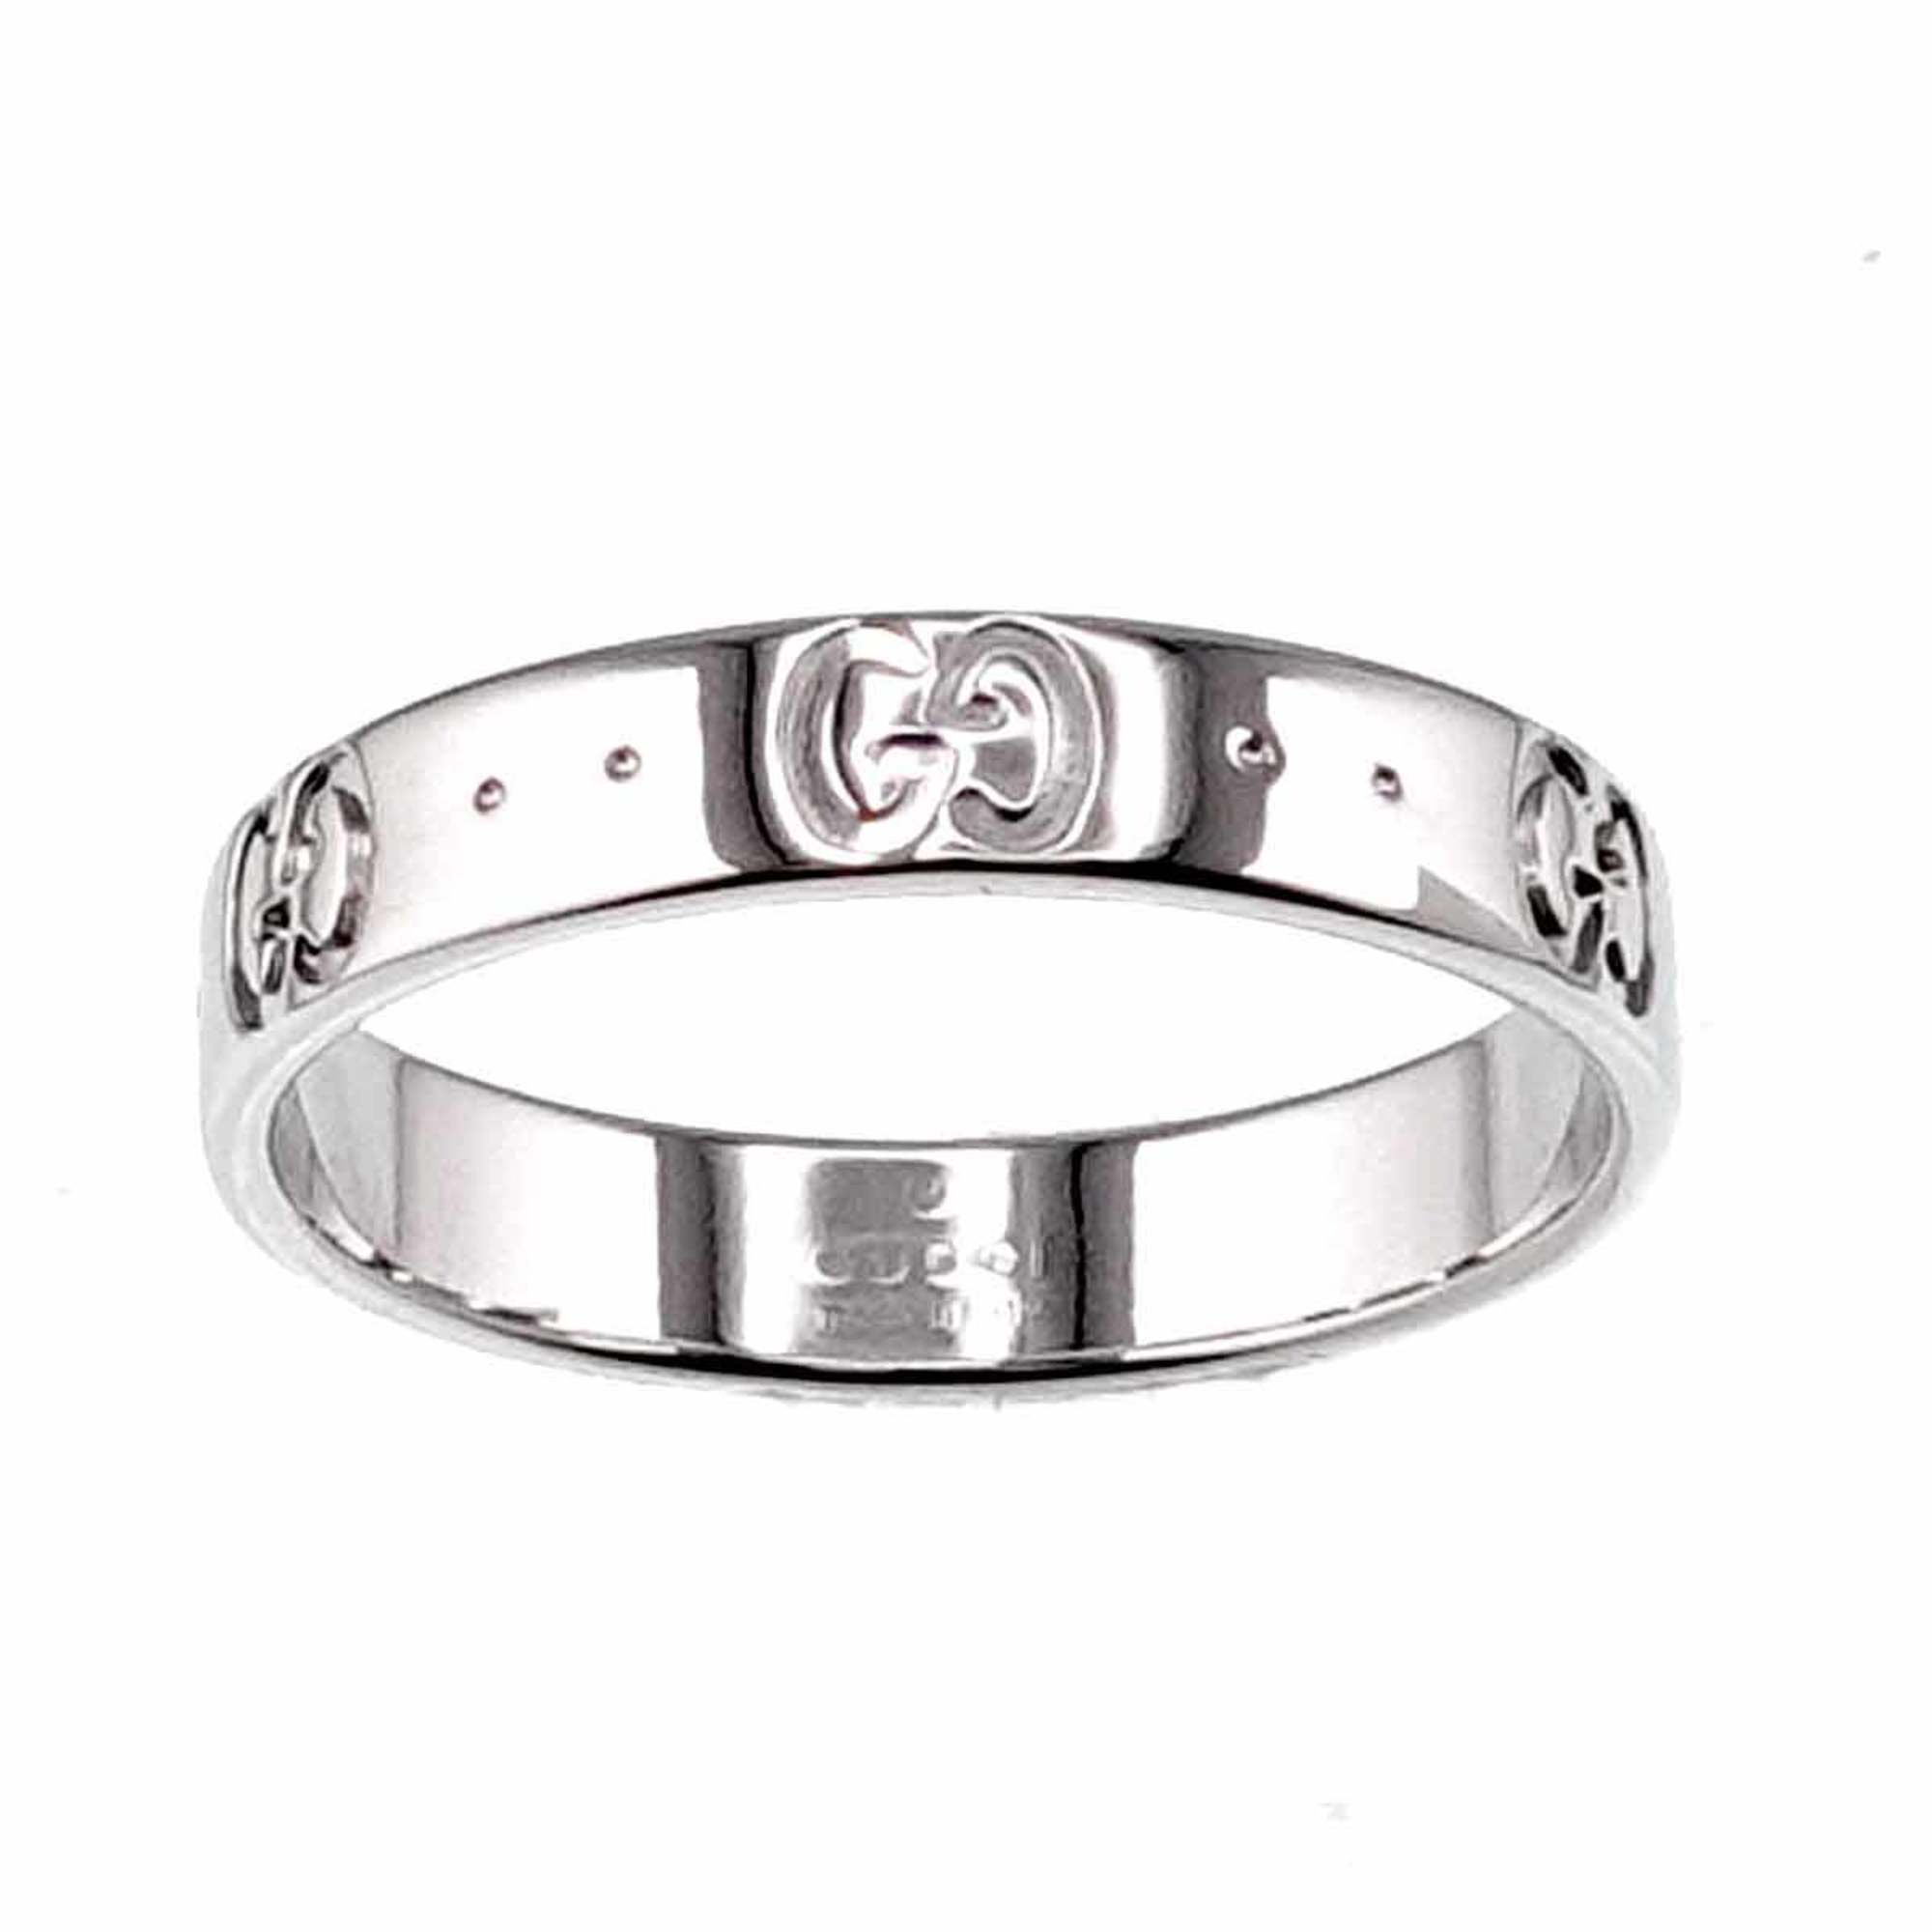 Gucci Icon #17 Ring, K18 WG White Gold 750, Ring